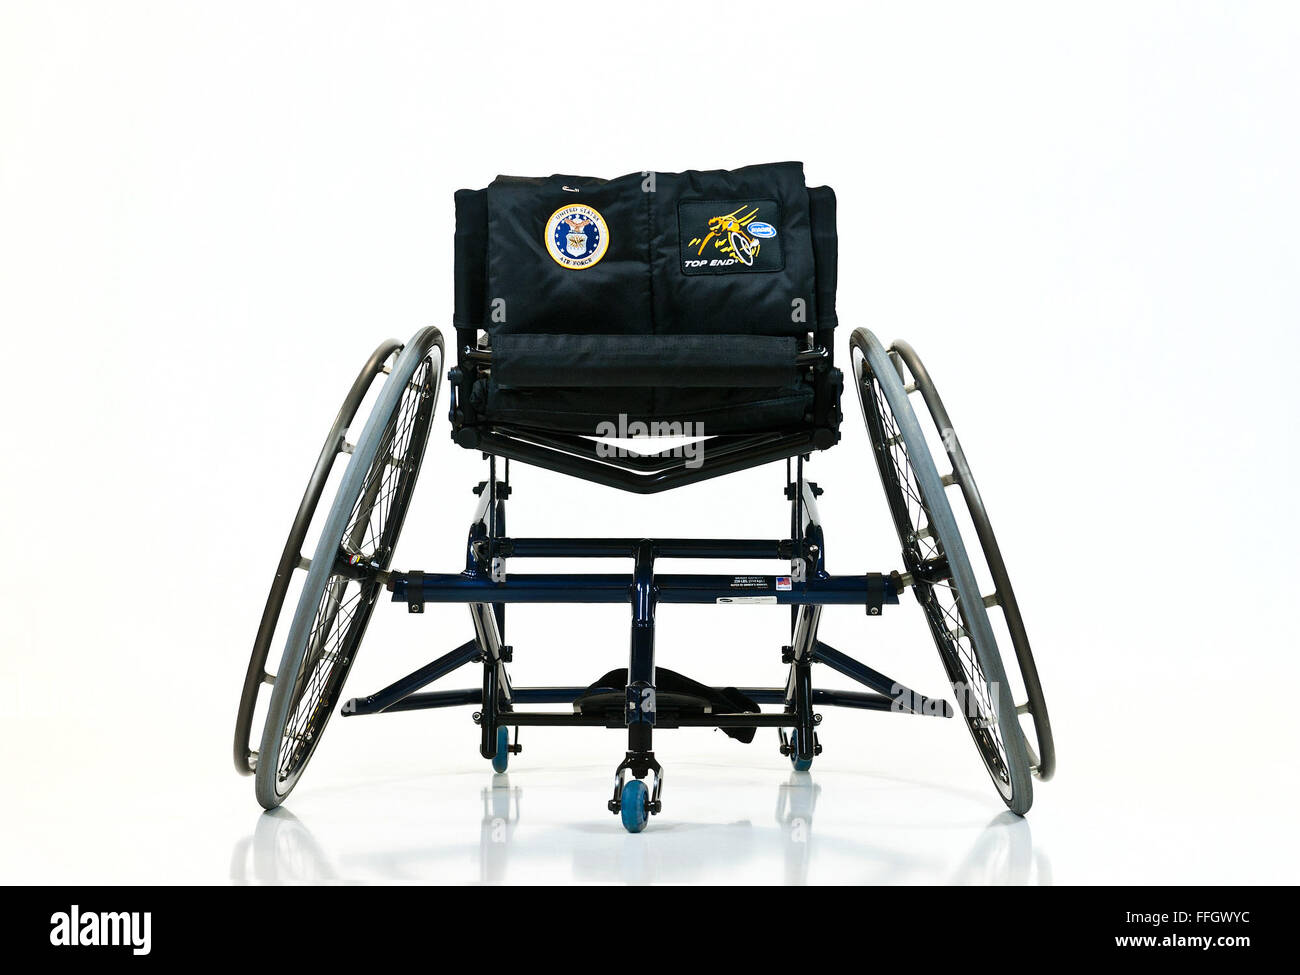 The Air Force team uses wheelchairs like this one in the wheelchair basketball events. Volunteers from rehabilitative equipment companies are on hand during the Warrior Games in case equipment is damaged and repairs are needed. Stock Photo